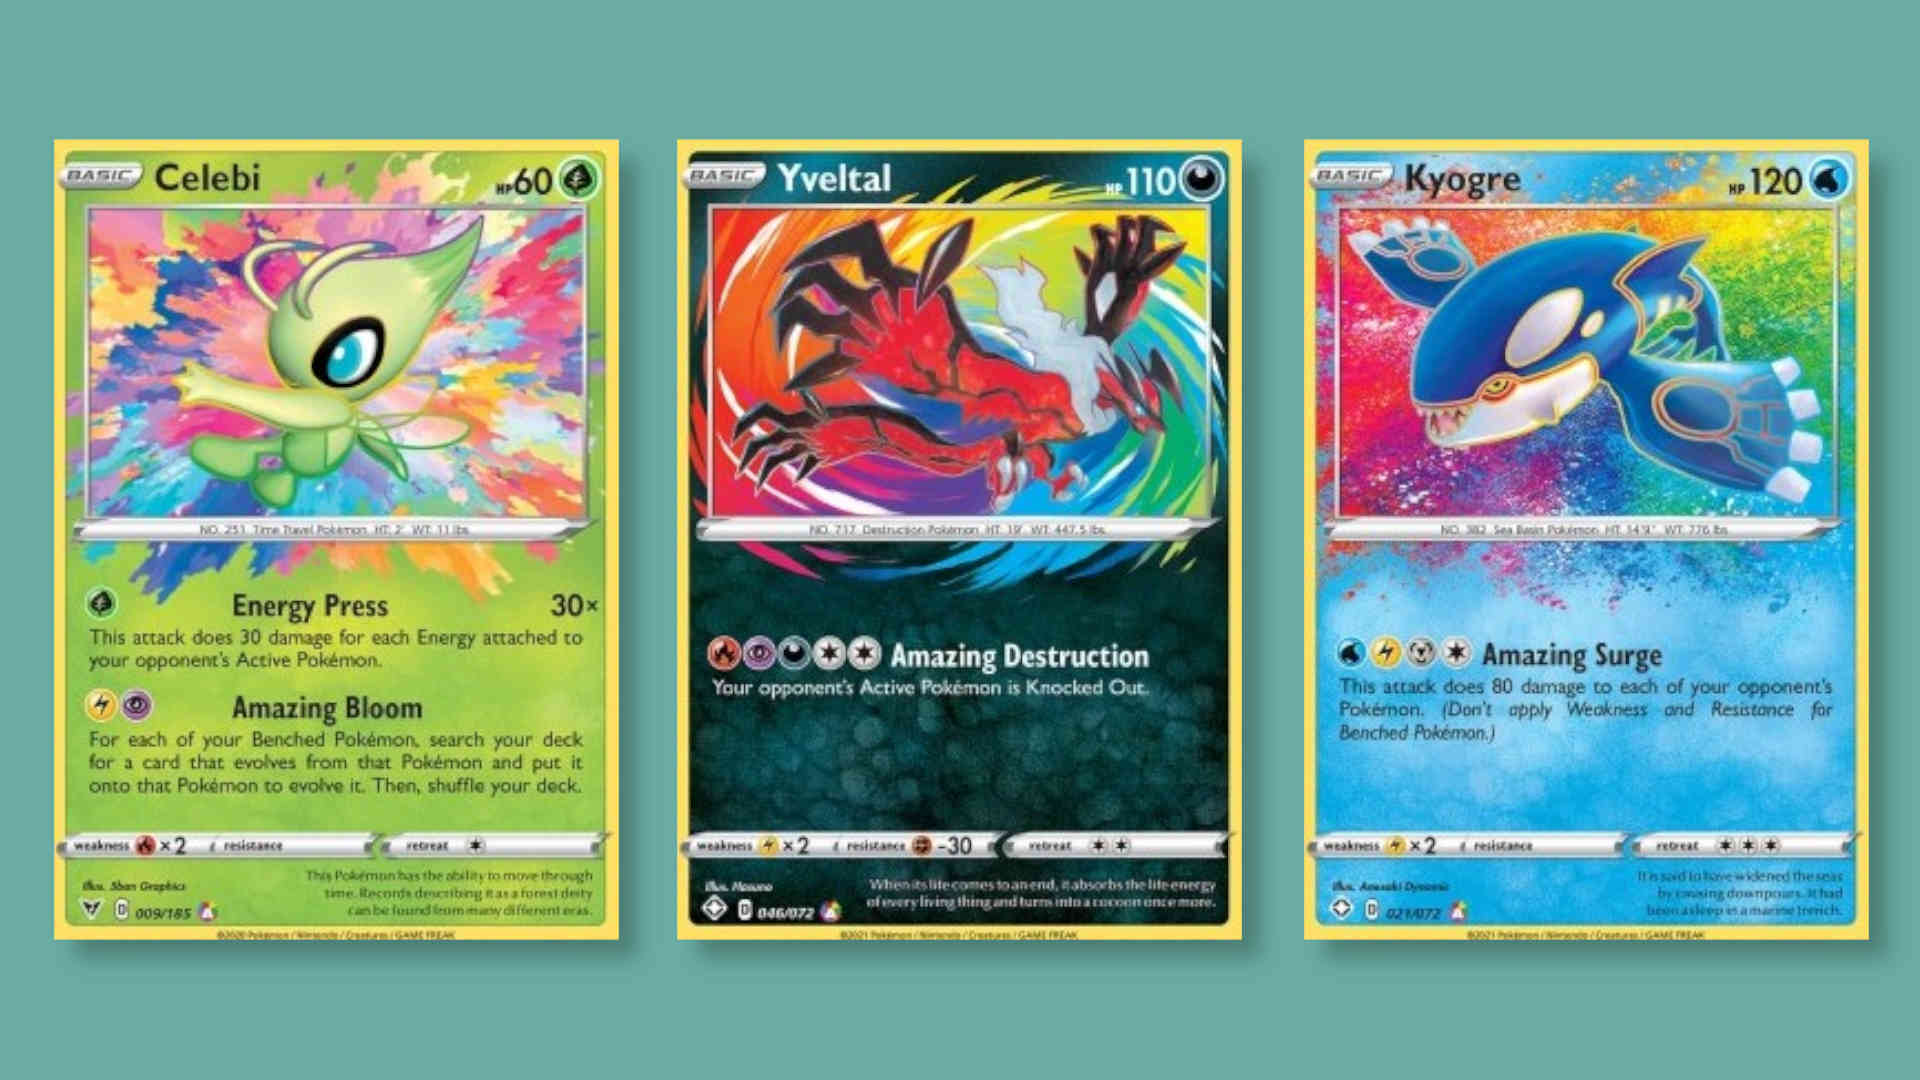 Radiant Pokemon vs Radiant Collection Cards. What's the Difference